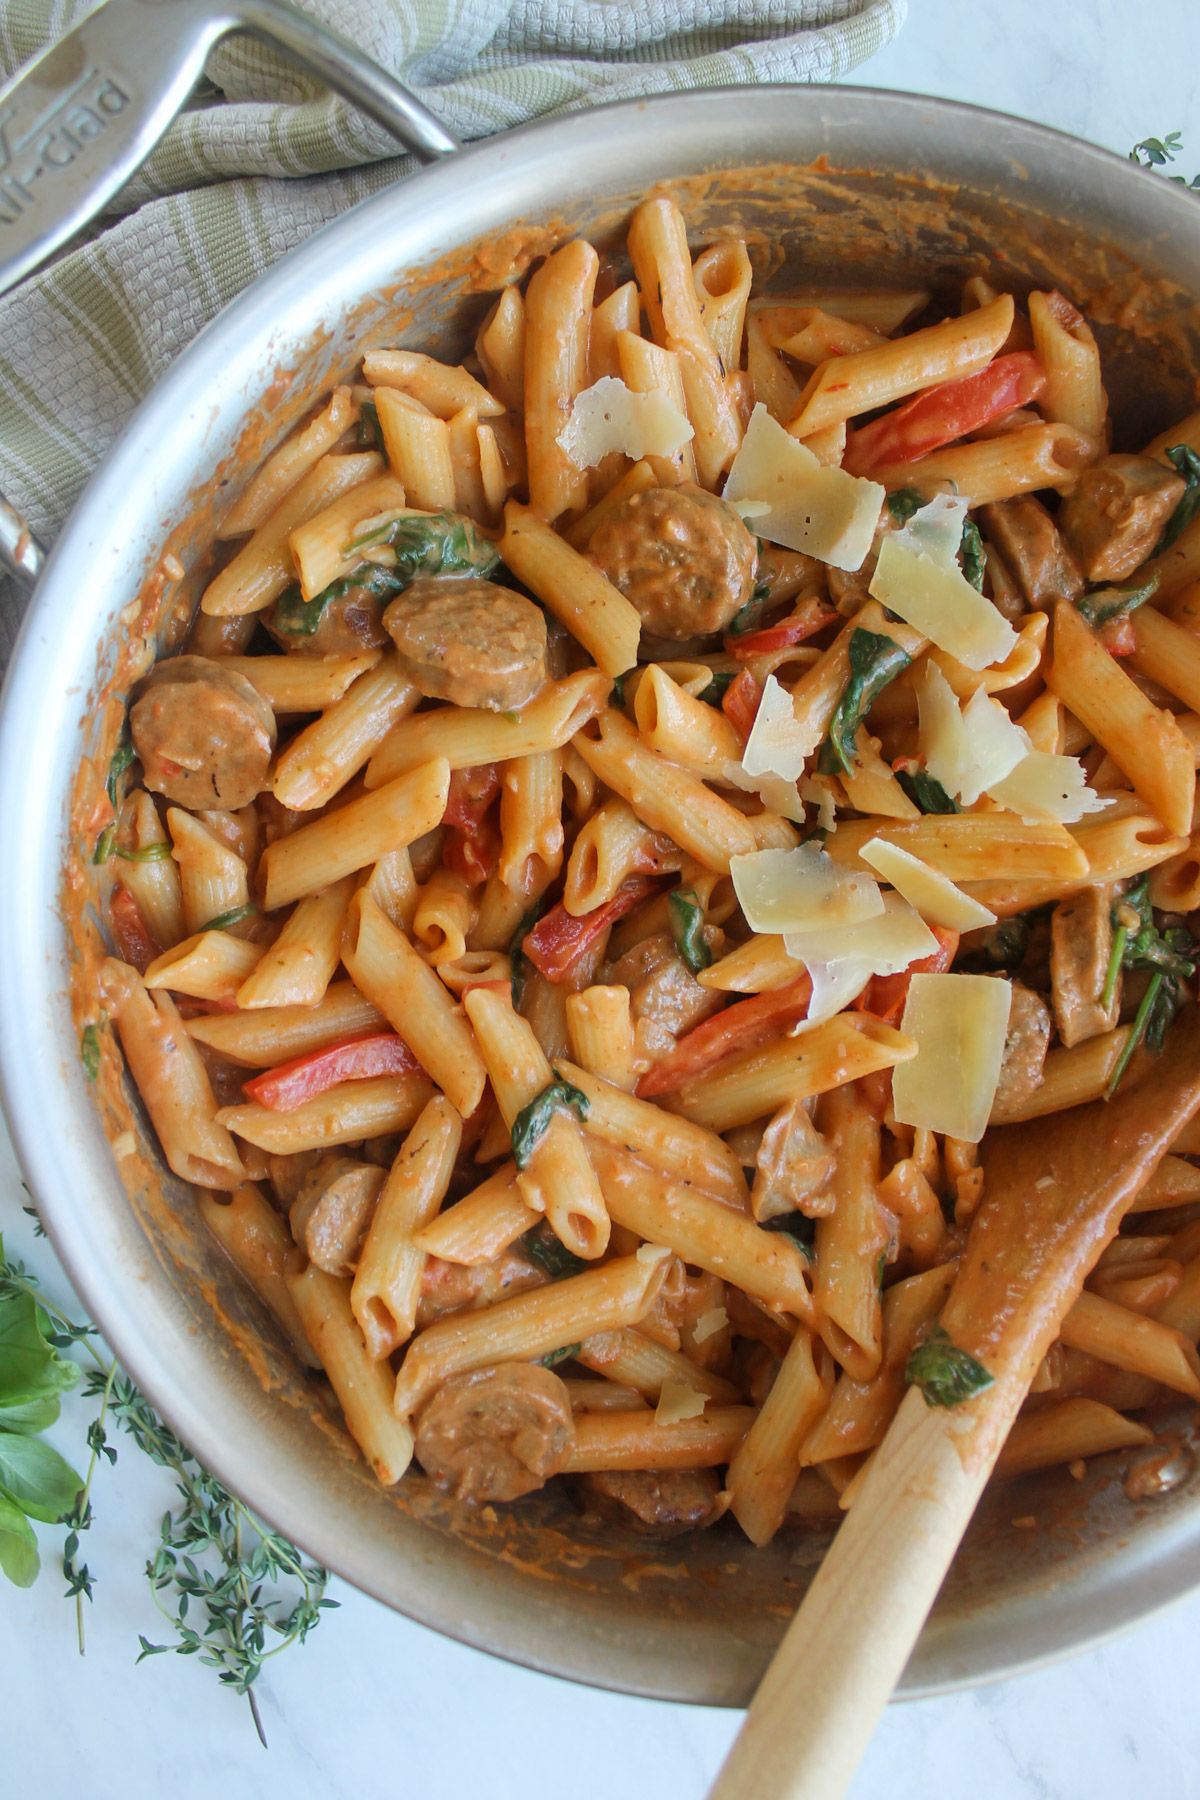 Creamy sausage pasta recipe with red bell pepper and spinch.